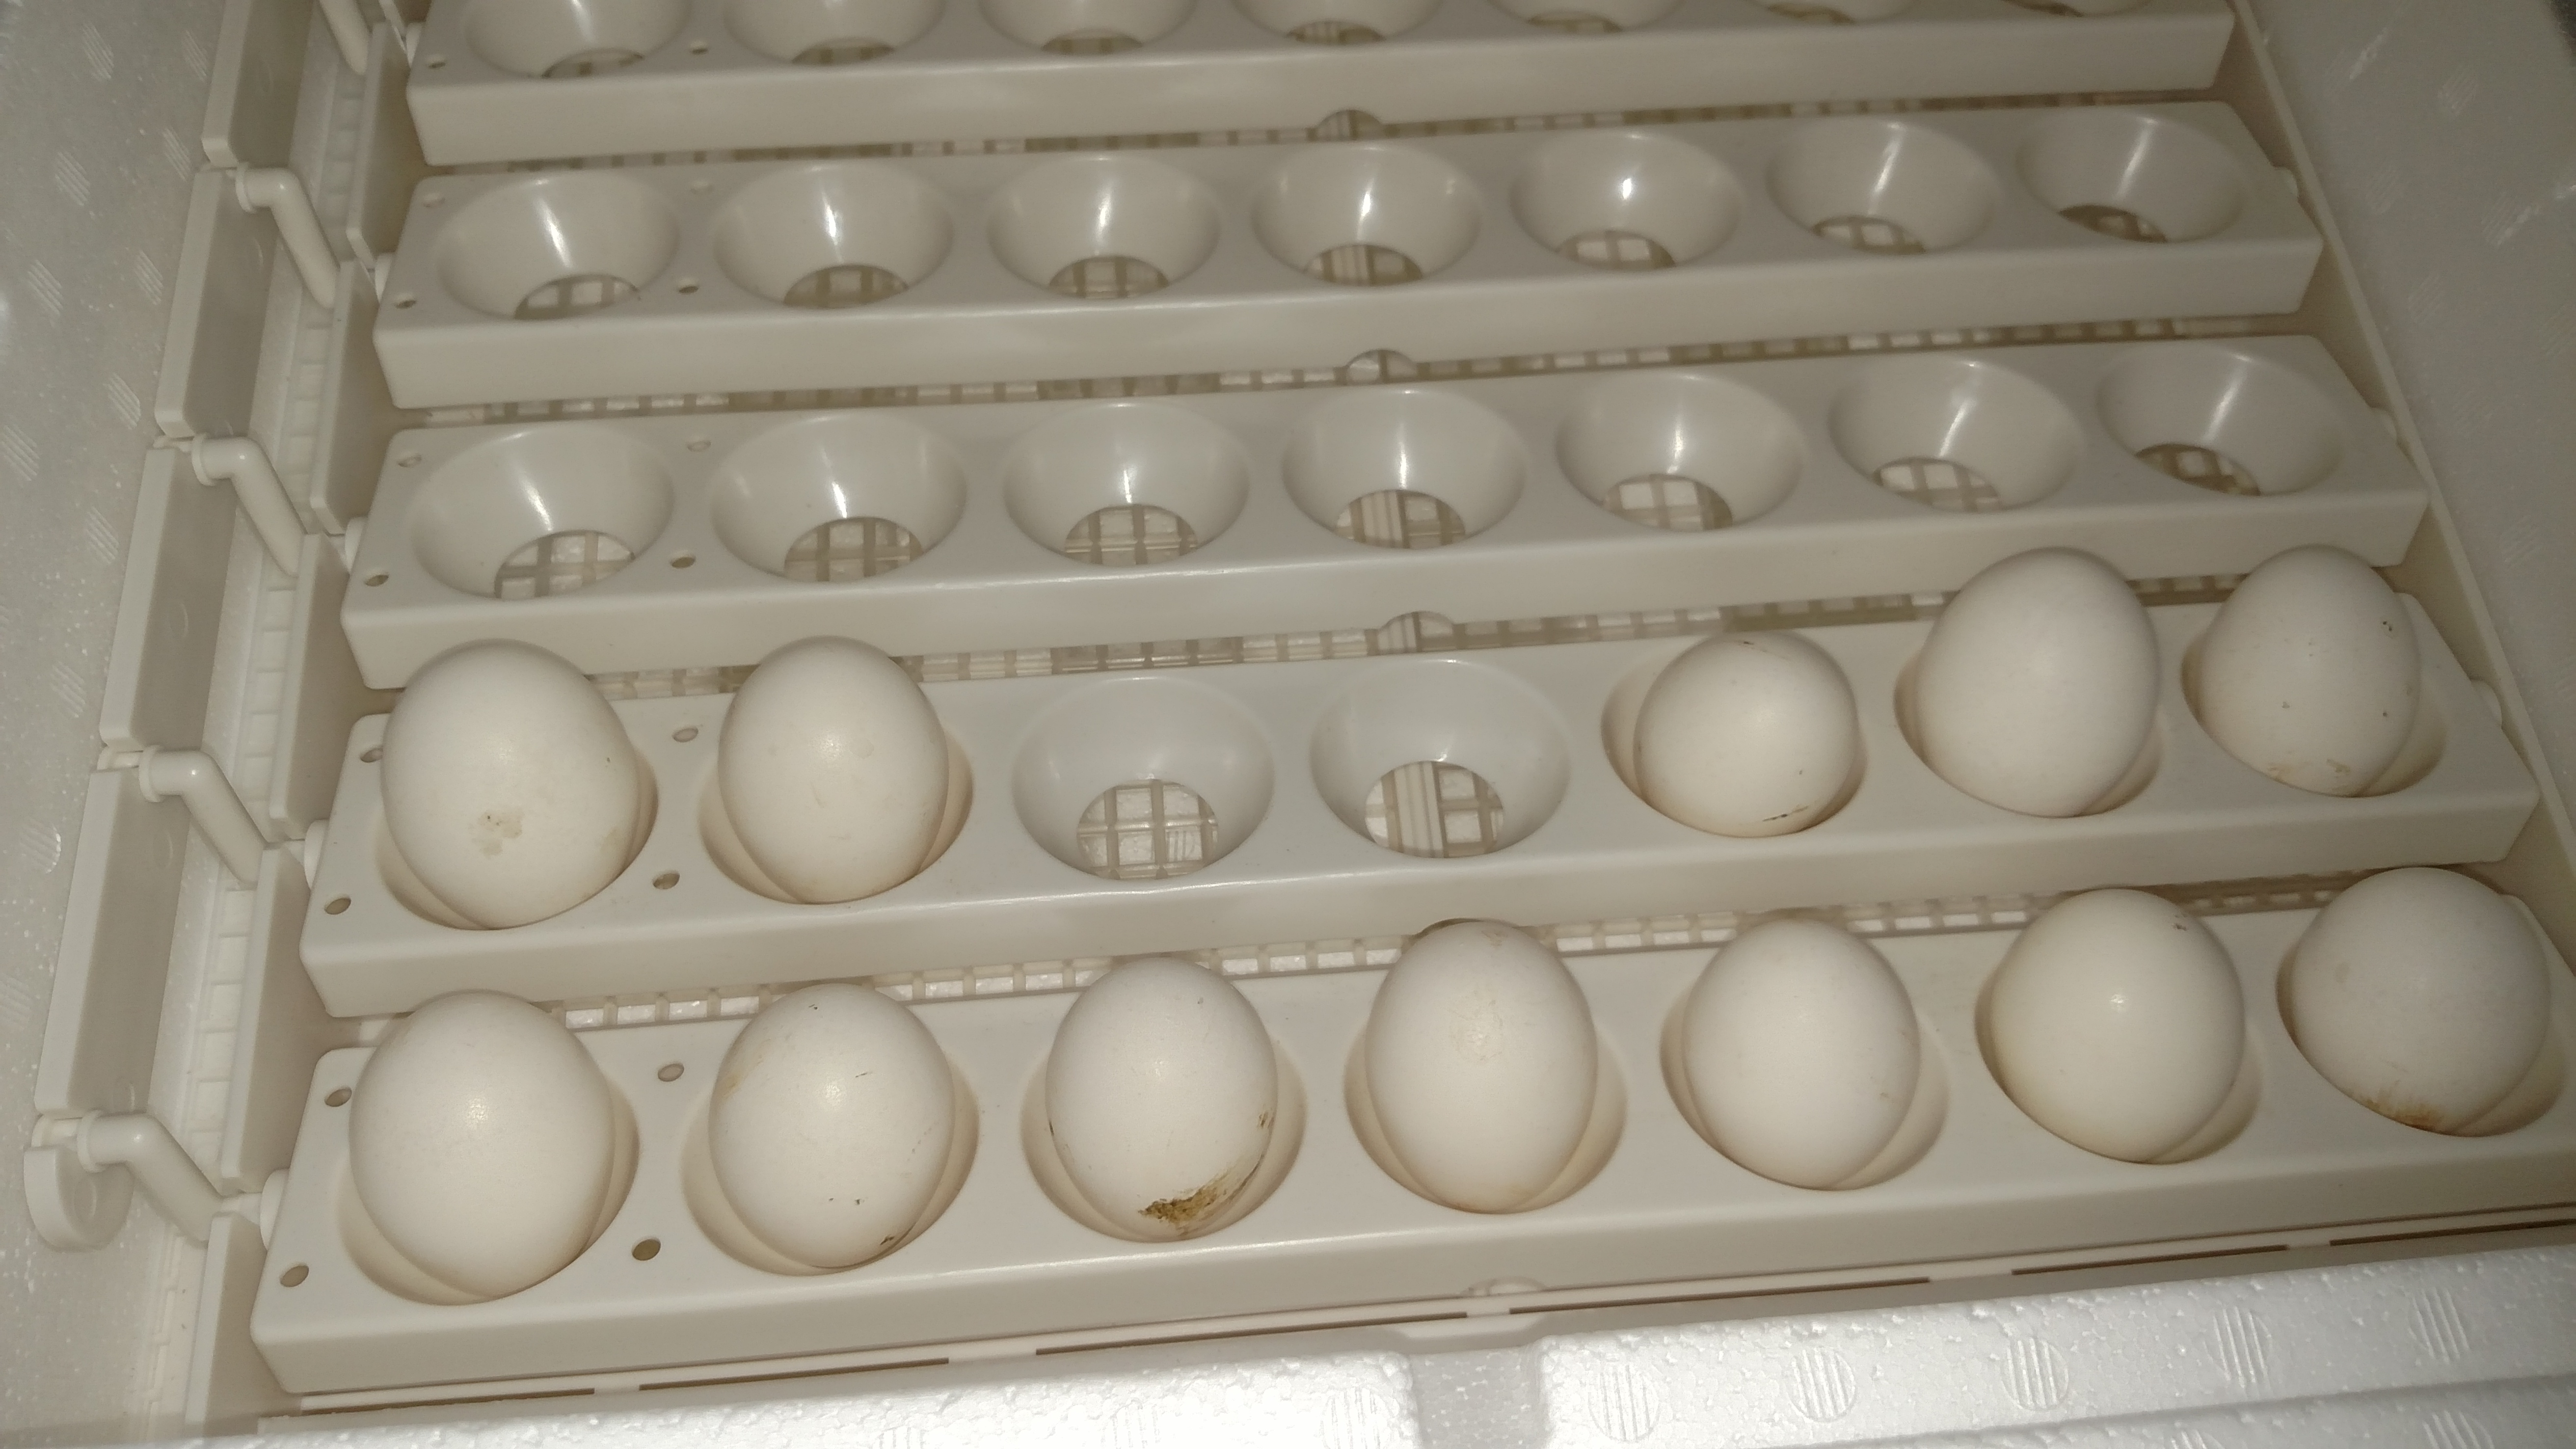 Set 12 more eggs yesterday February 10th.  If at first you don't succeed.  Keep trying.....  Gotta get humidity below 40 somehow and keep it there.  Using dry rice as if today.